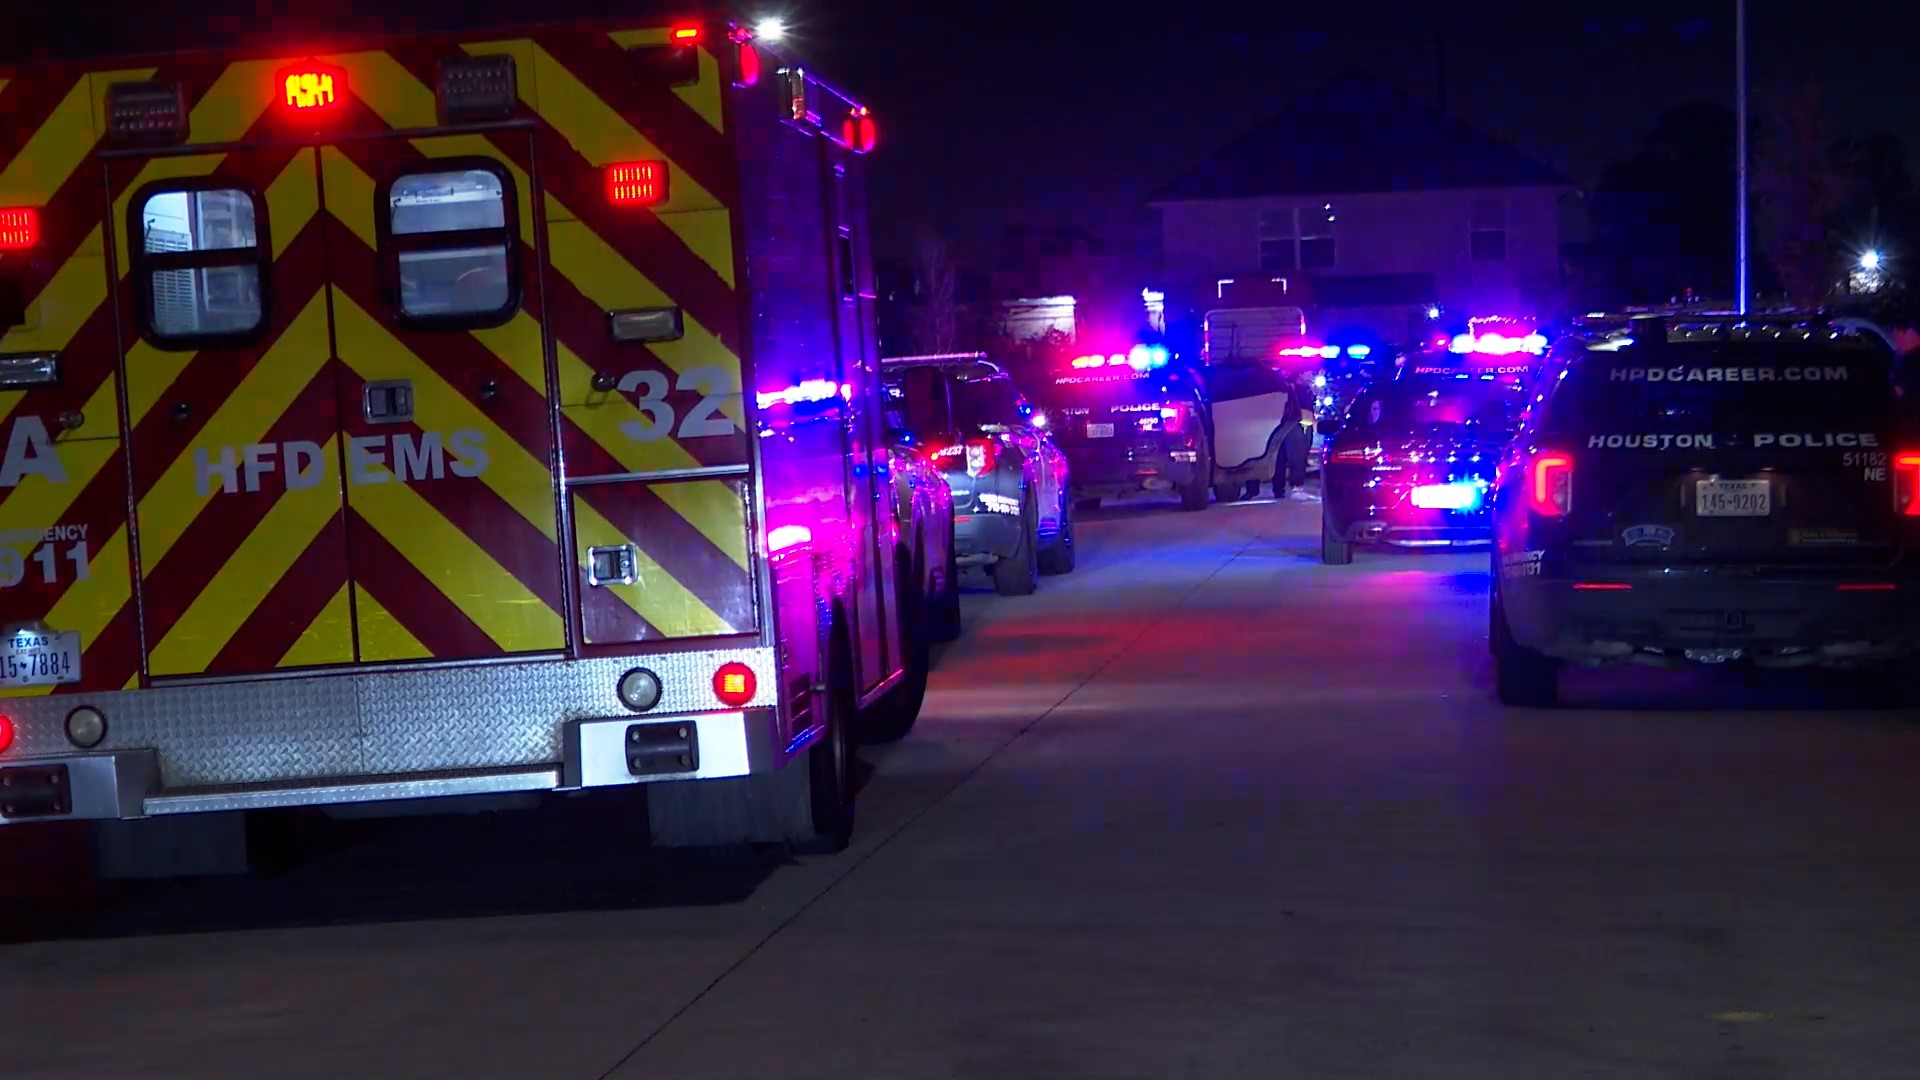 The Houston Police Department said the woman called 911 around 1:20 a.m. reporting that she had just shot her wife after a fight at their home on Doris Oaks Circle.